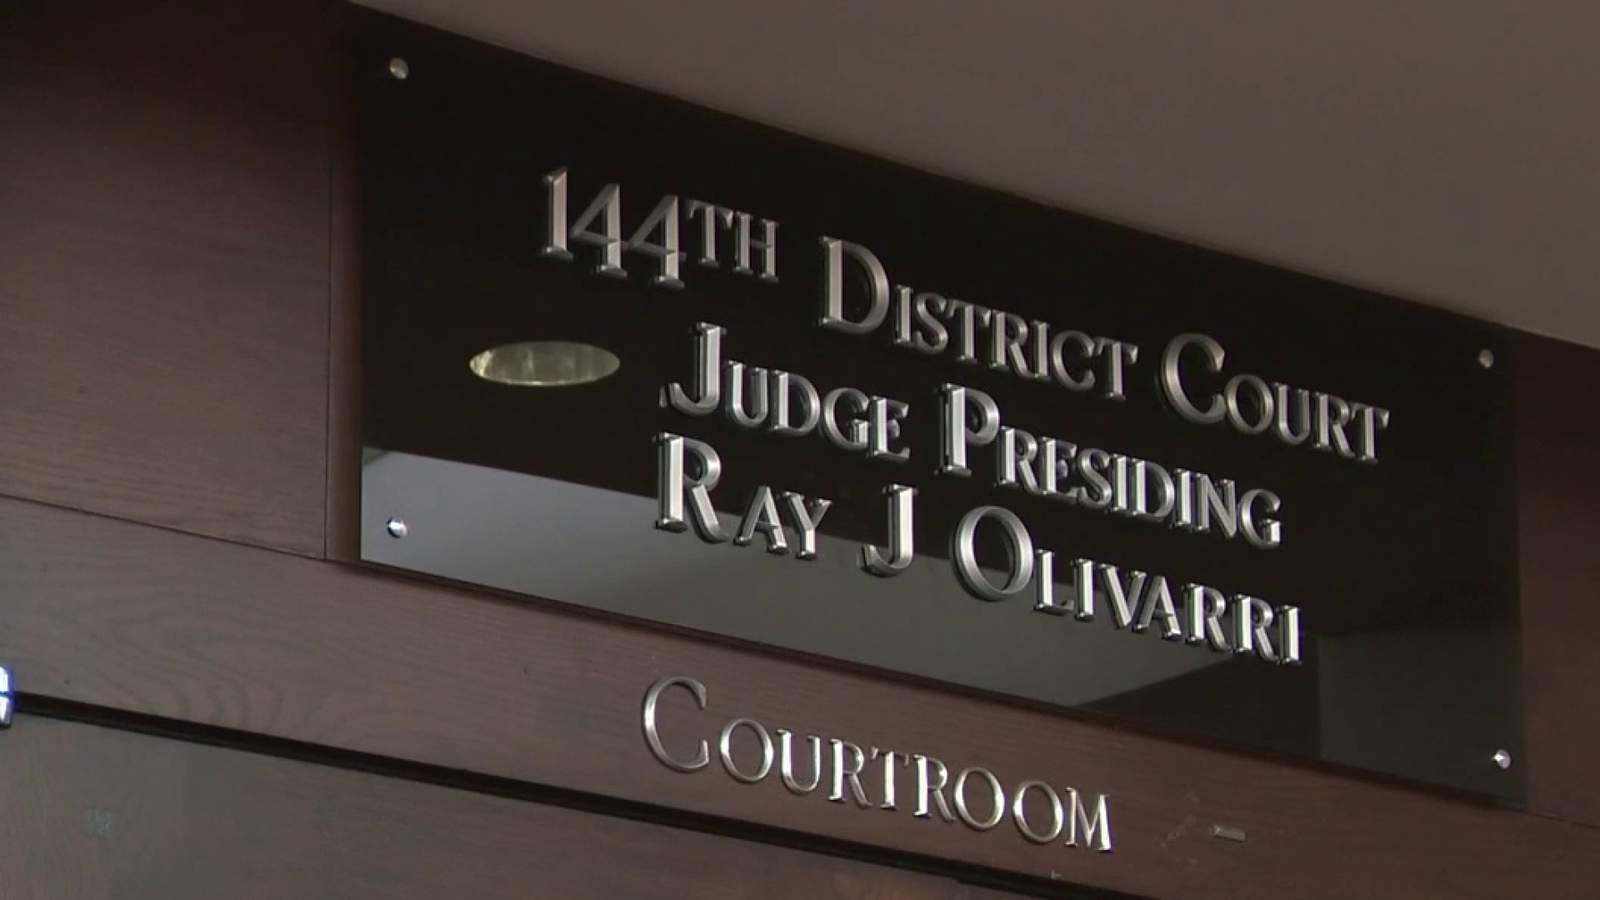 Deadline approaching for political parties to select candidates for 144th State District Court vacancy